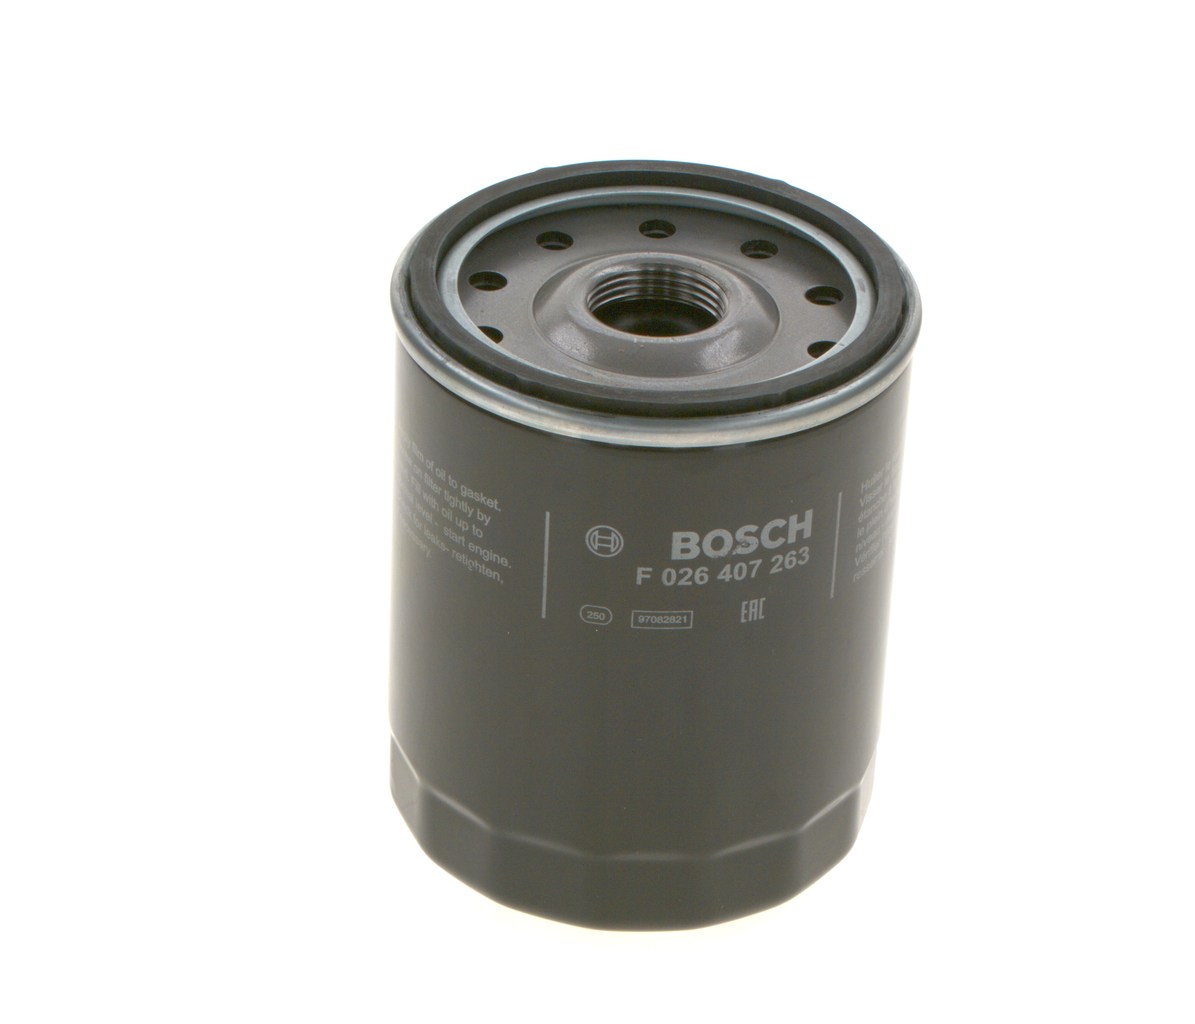 P 7263 BOSCH M 30 x 2, with one anti-return valve, Spin-on Filter Inner Diameter 2: 92mm, Outer Diameter 2: 102mm, Ø: 108mm, Height: 141mm Oil filters F 026 407 263 buy